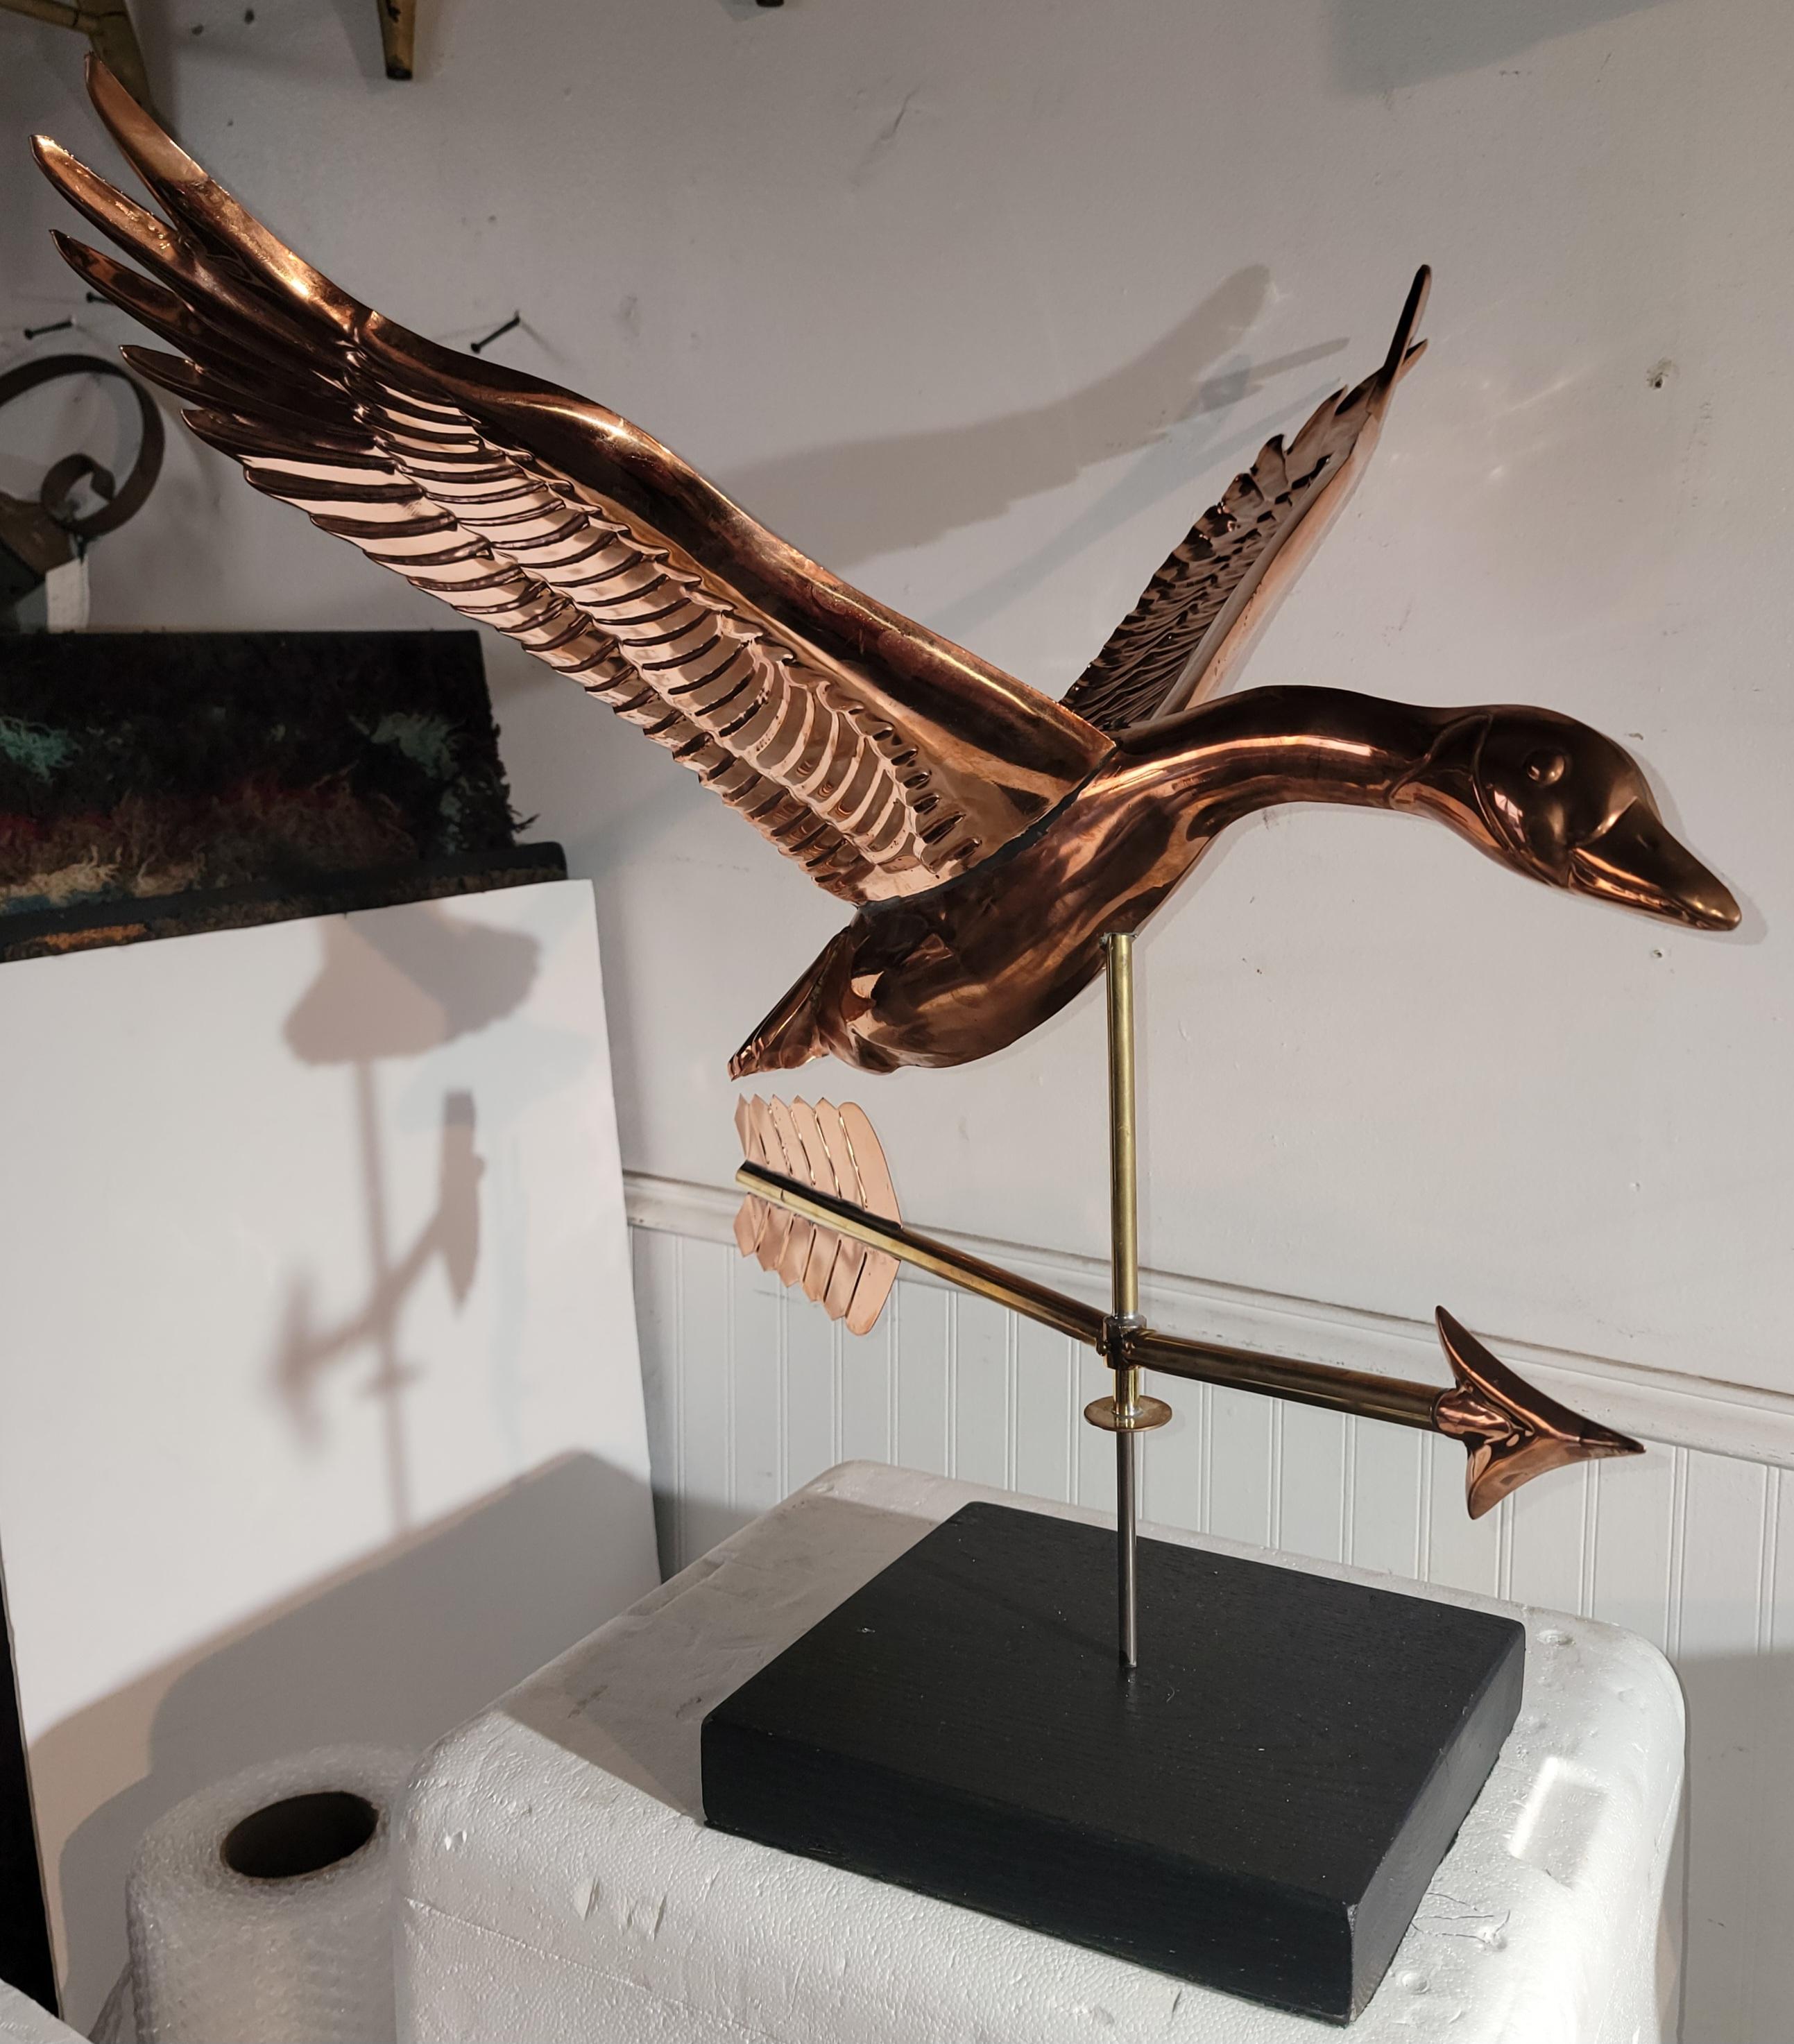 20Thc Copper & brass flying geese weather vane.This Canadian  goose weather vane is a latter version of the 19thc weather vane.